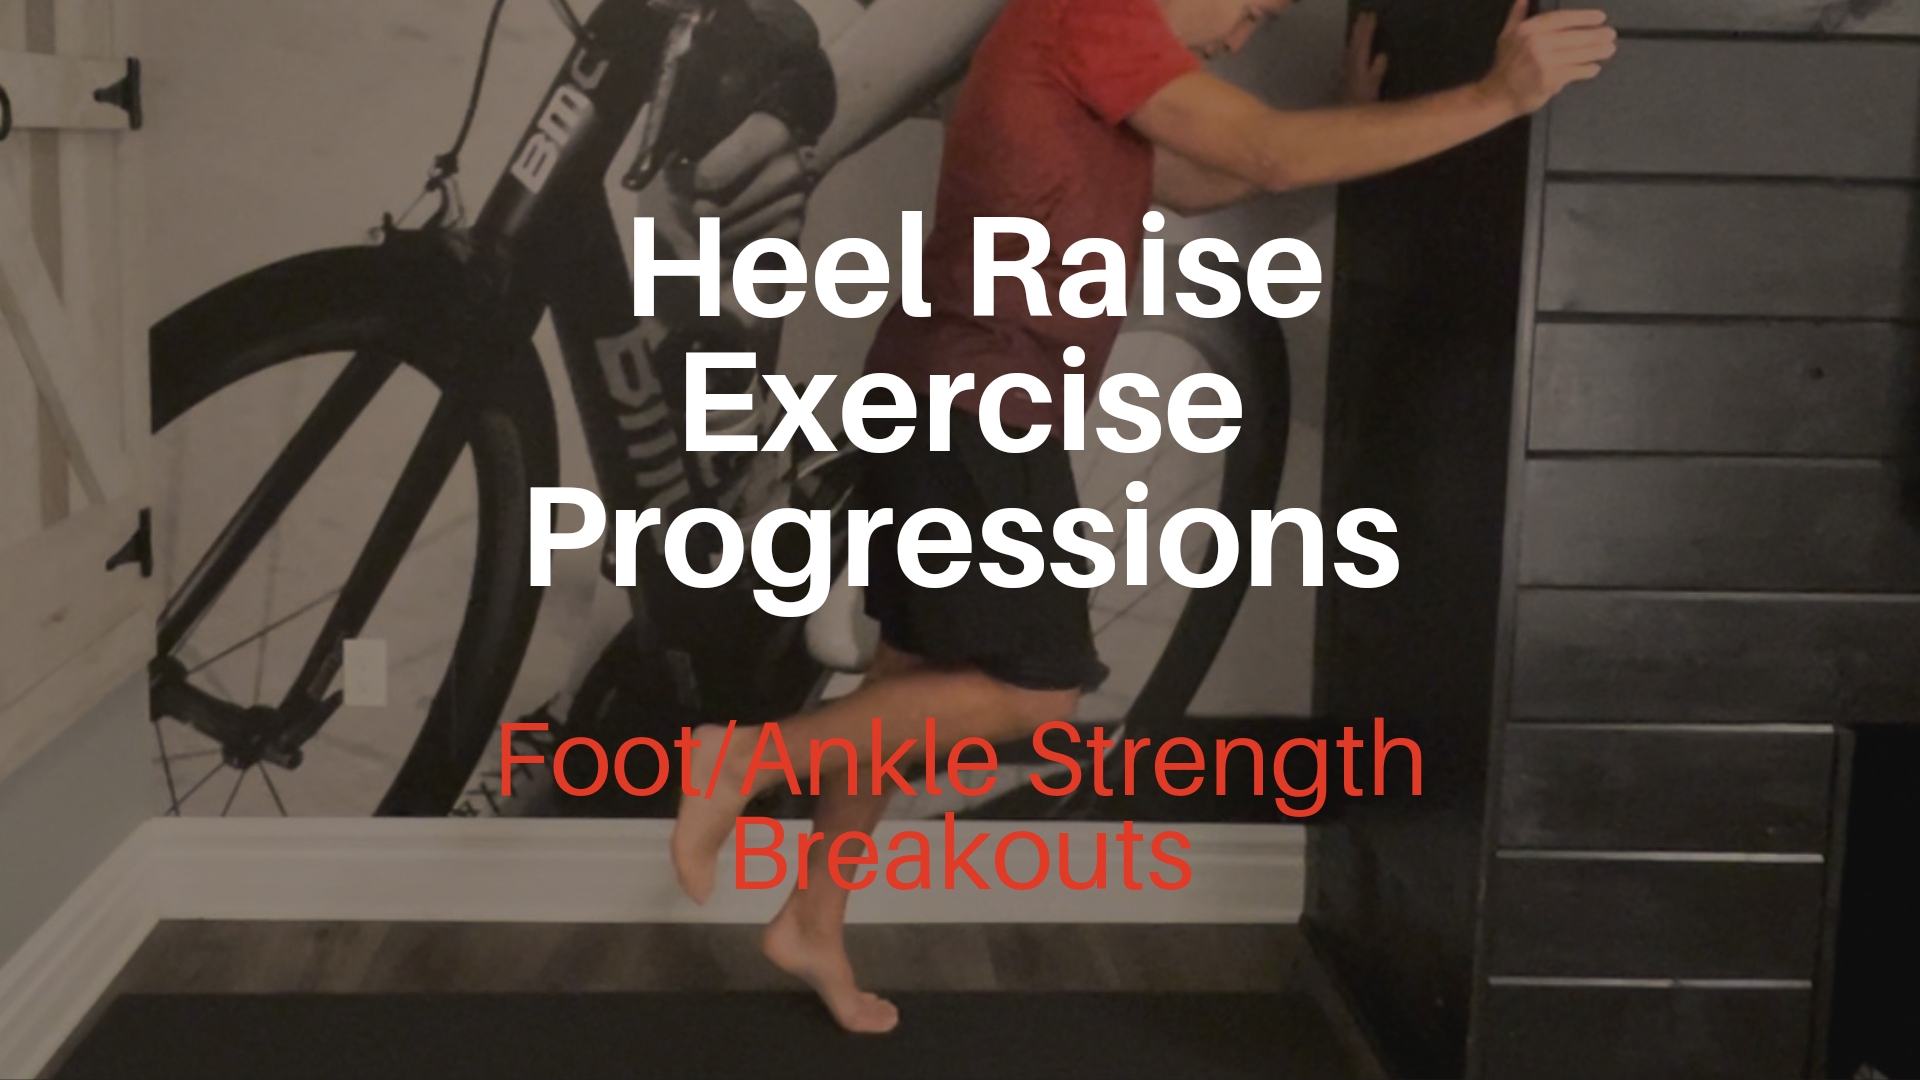 Here are 2 heel raise progressions that can be used for Achilles Tendi